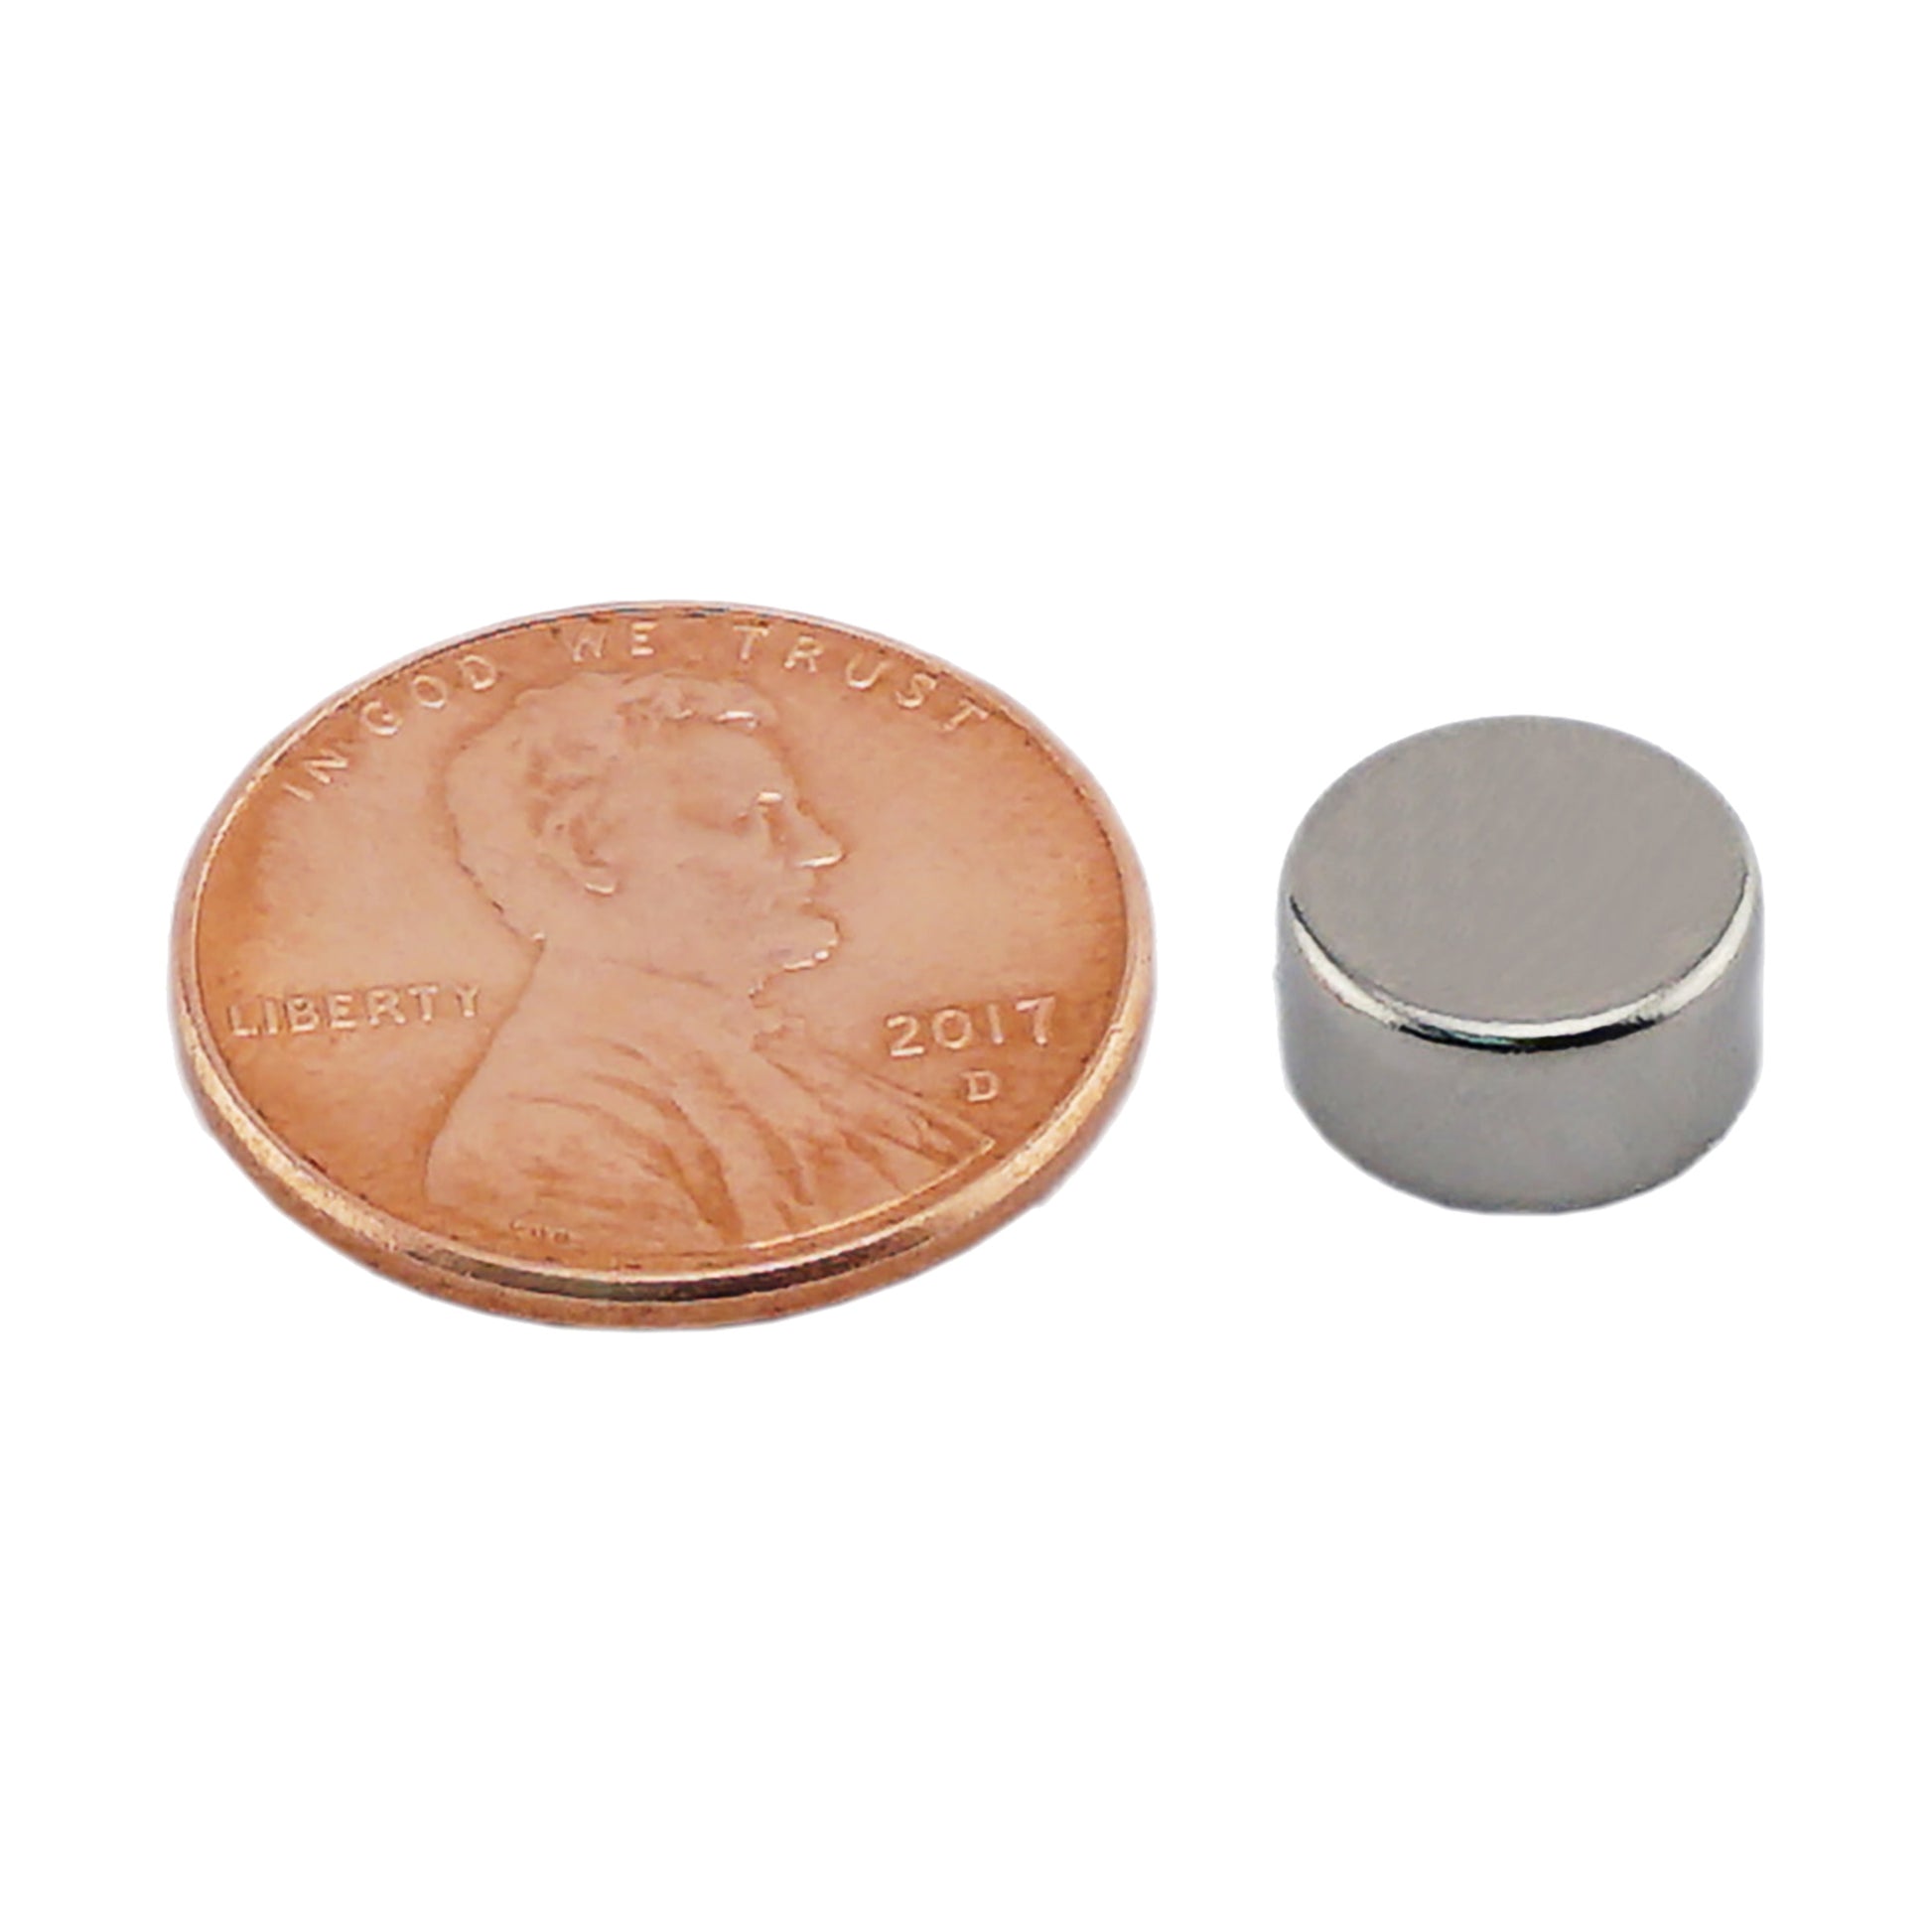 Load image into Gallery viewer, ND145N-35 Neodymium Disc Magnet - Compared to Penny for Size Reference